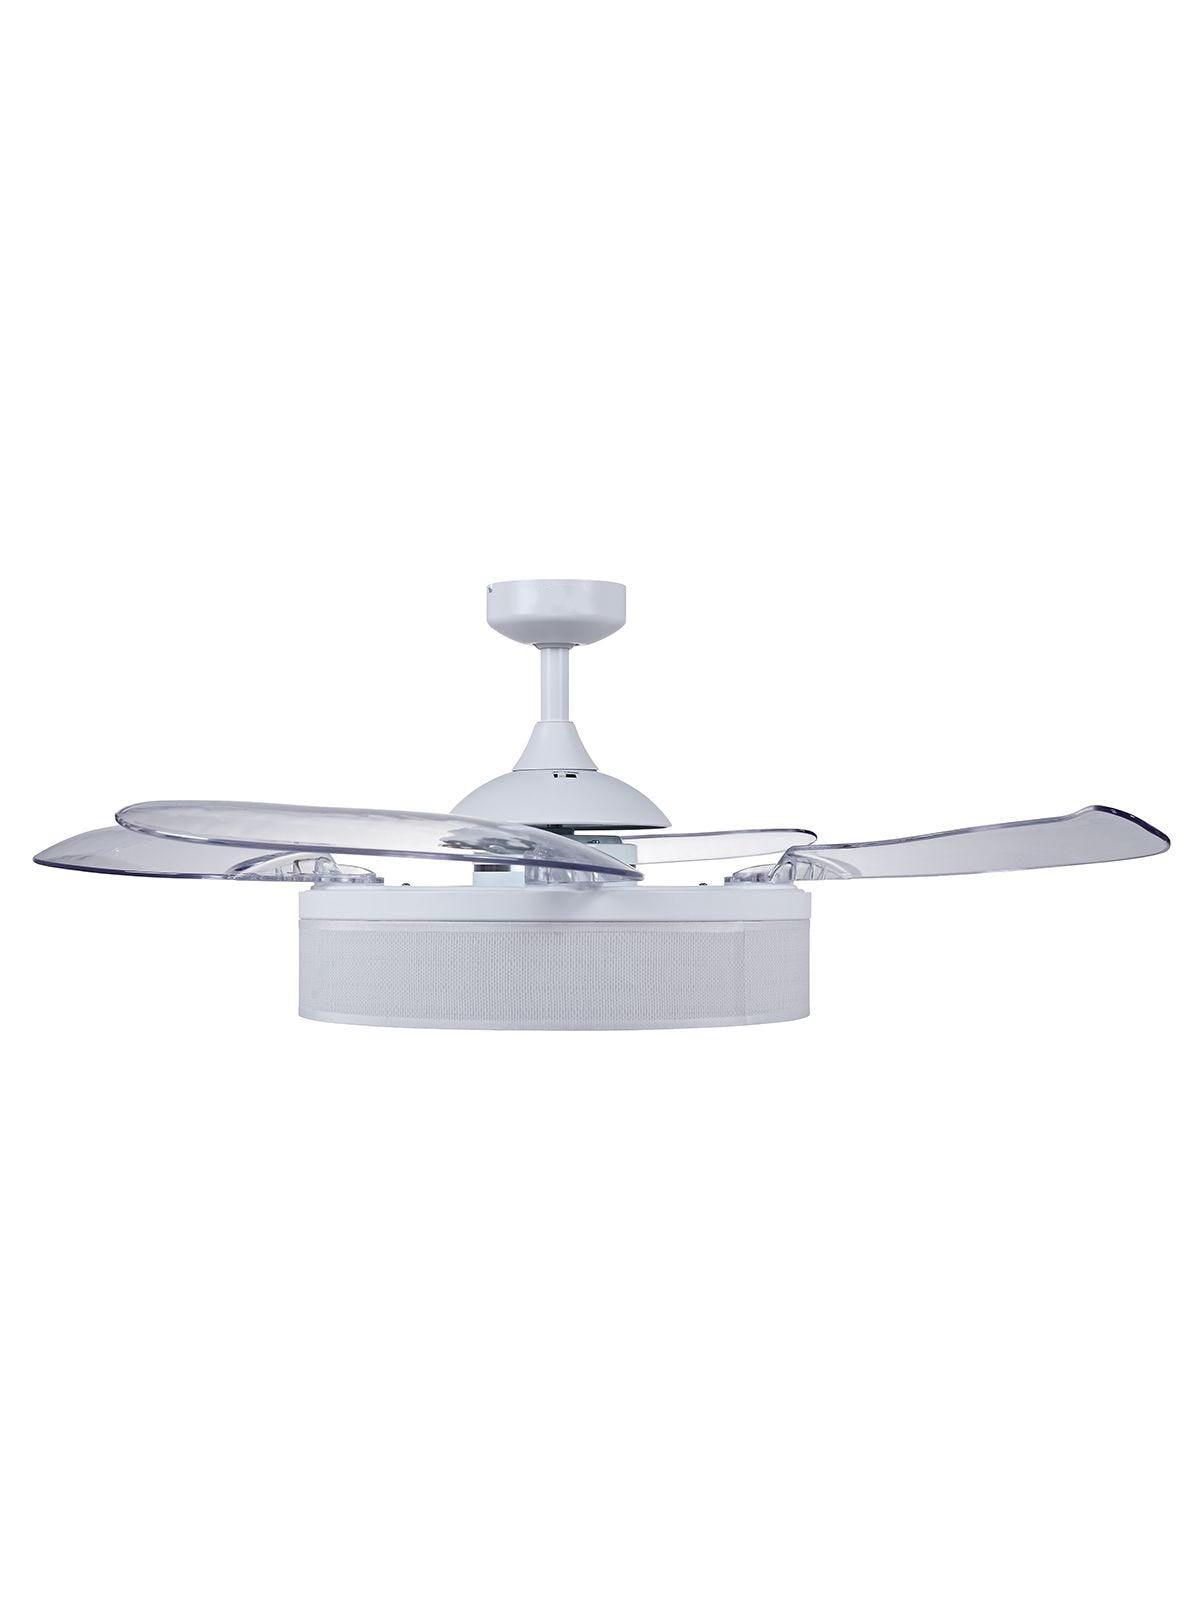 Steel with Fabric Drum Shade and Retractable Blade Ceiling Fan - LV LIGHTING